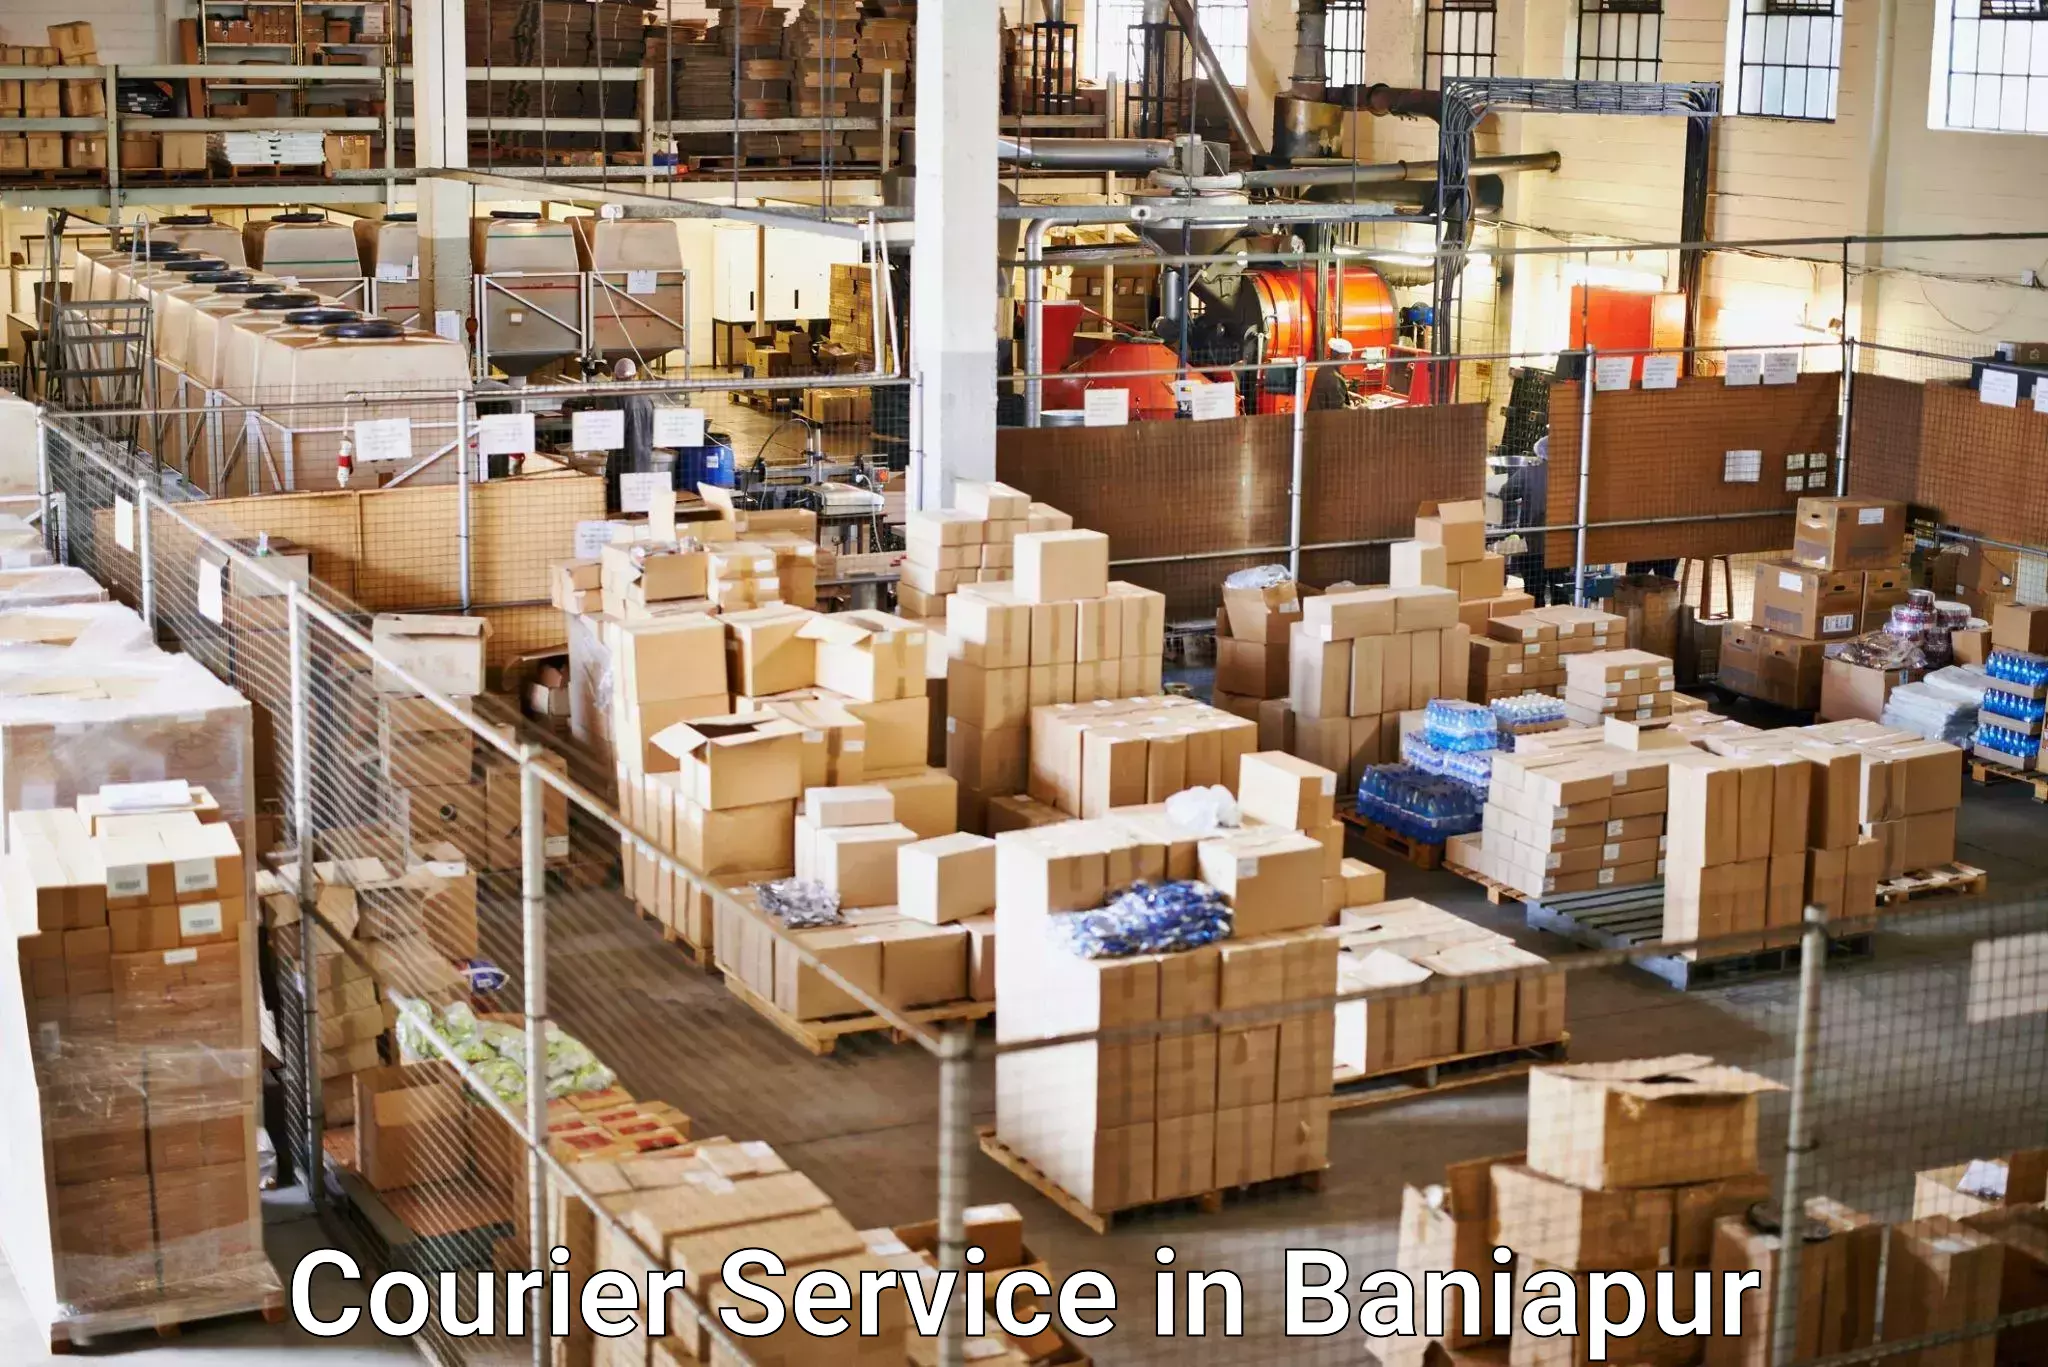 Sustainable courier practices in Baniapur